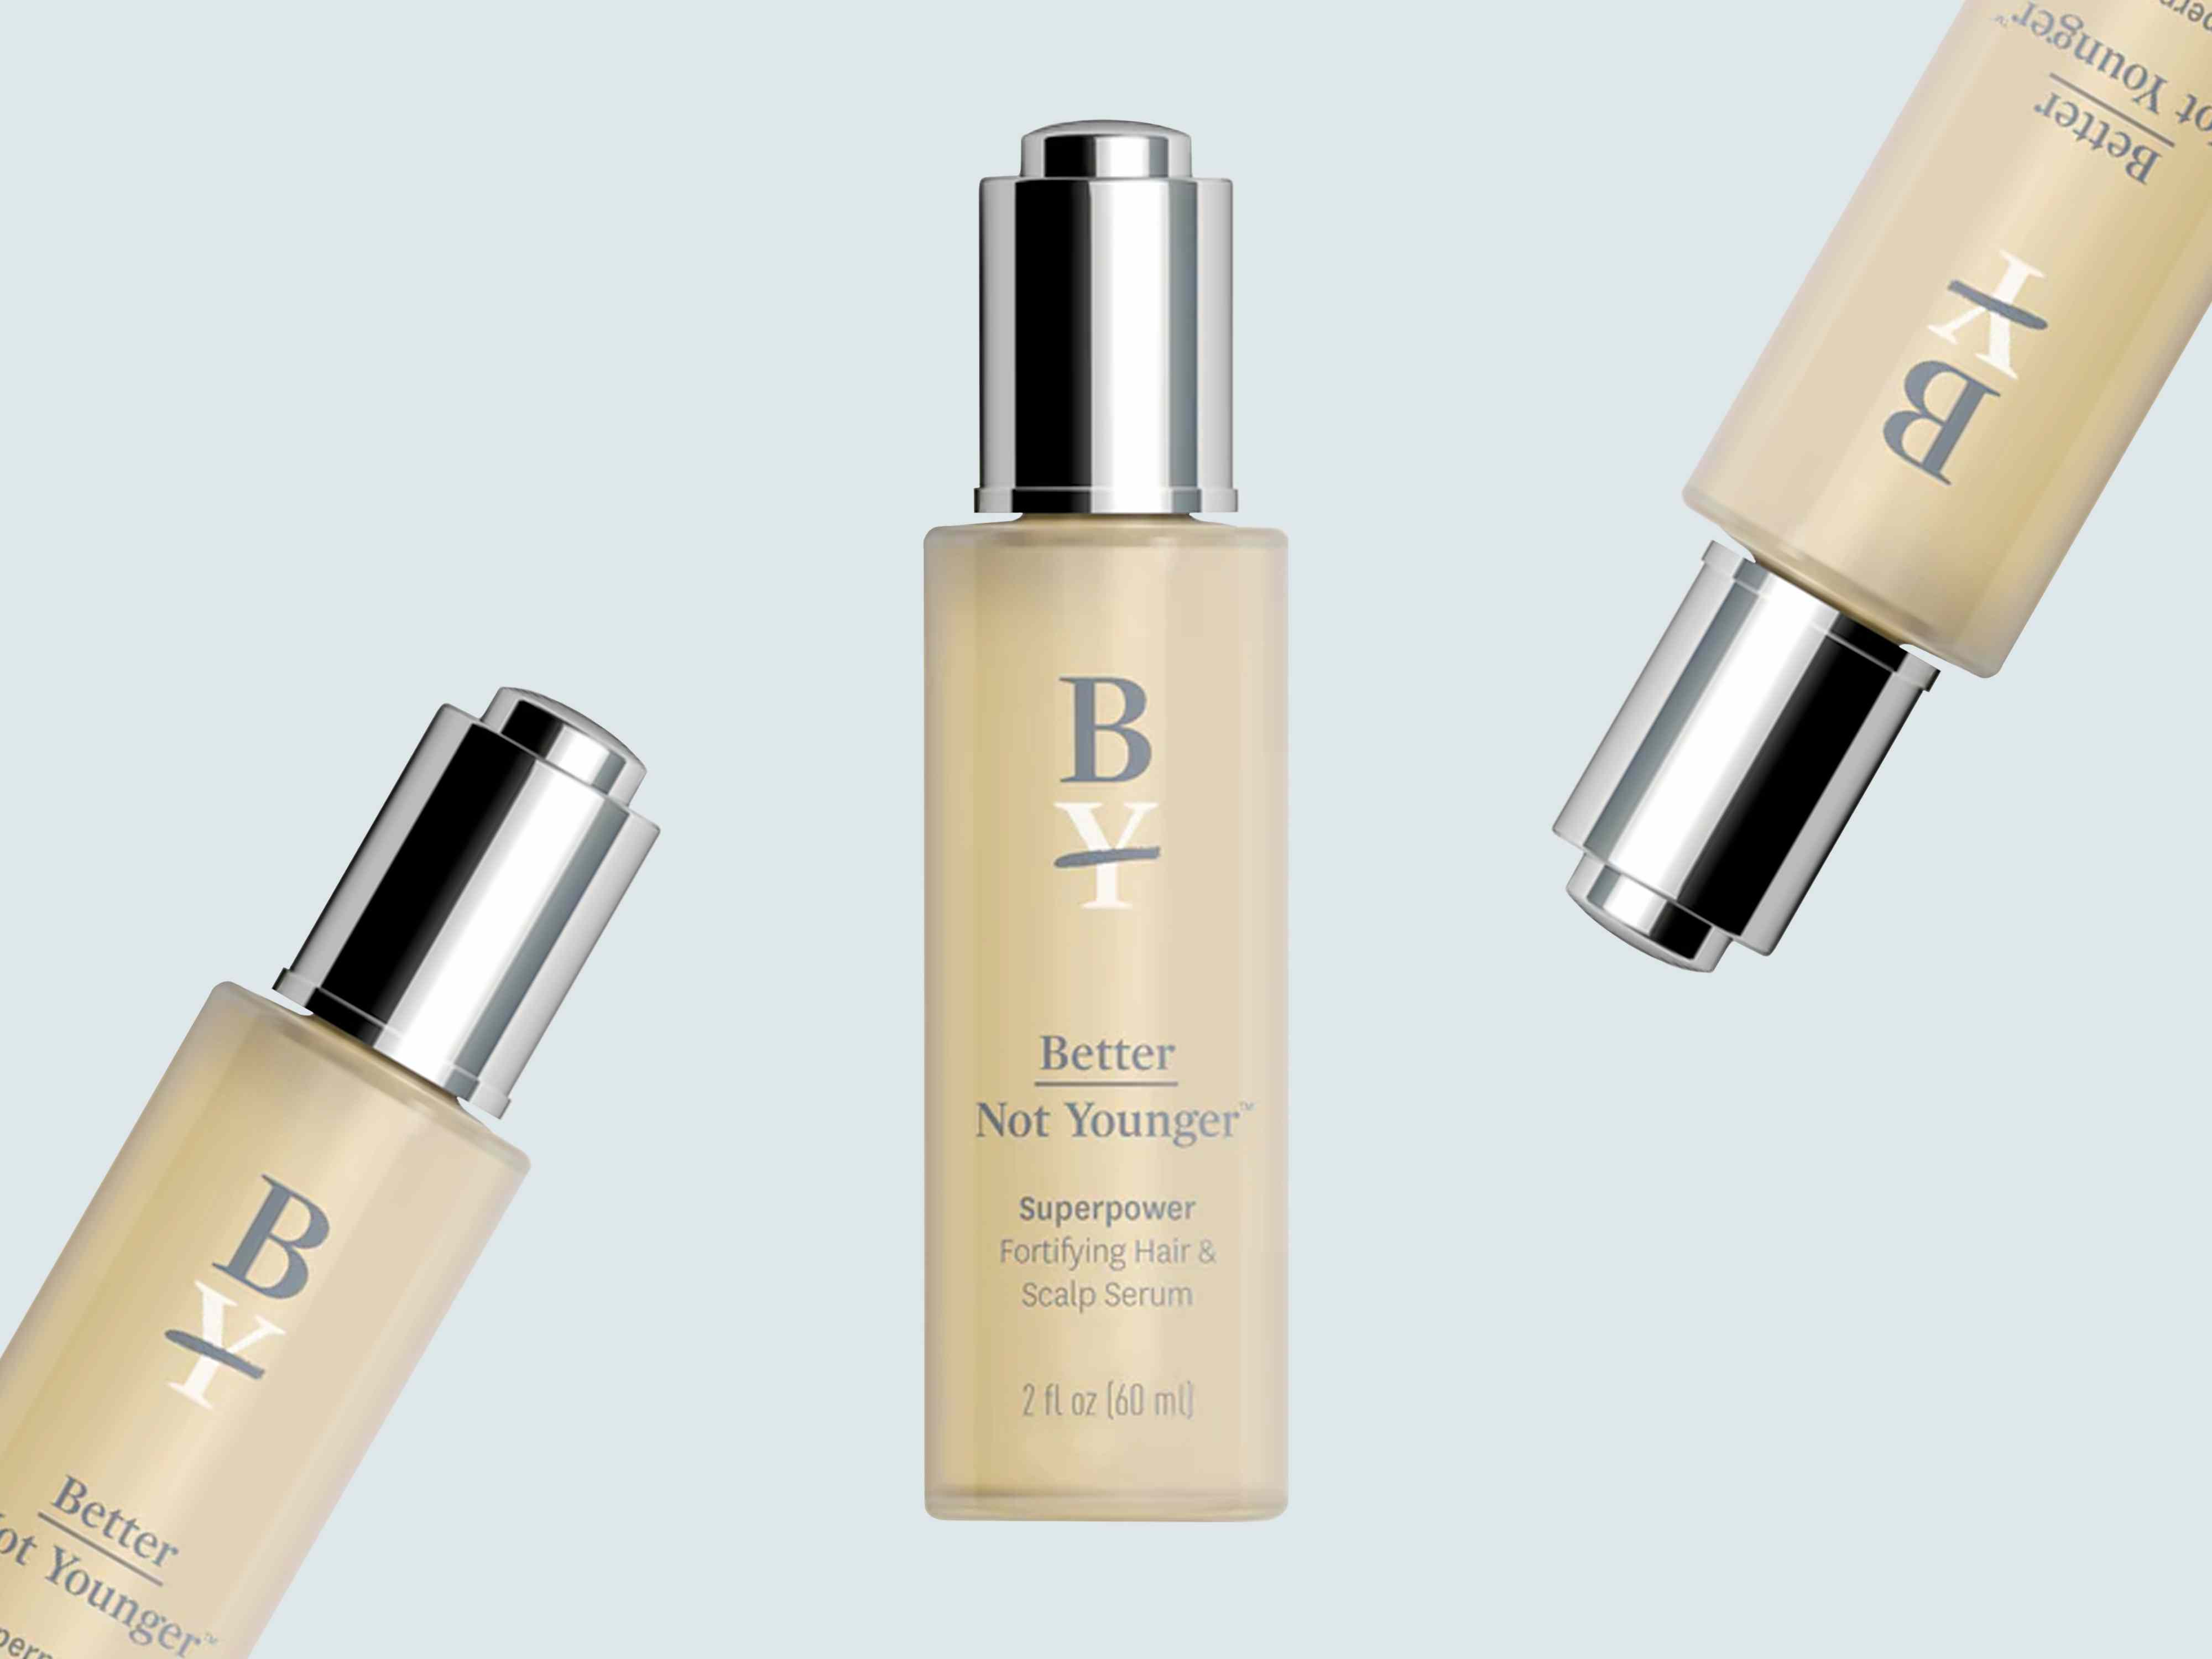 Shoppers Say This Serum Makes Thinning, Postmenopausal Hair “Thick” and “Shiny”